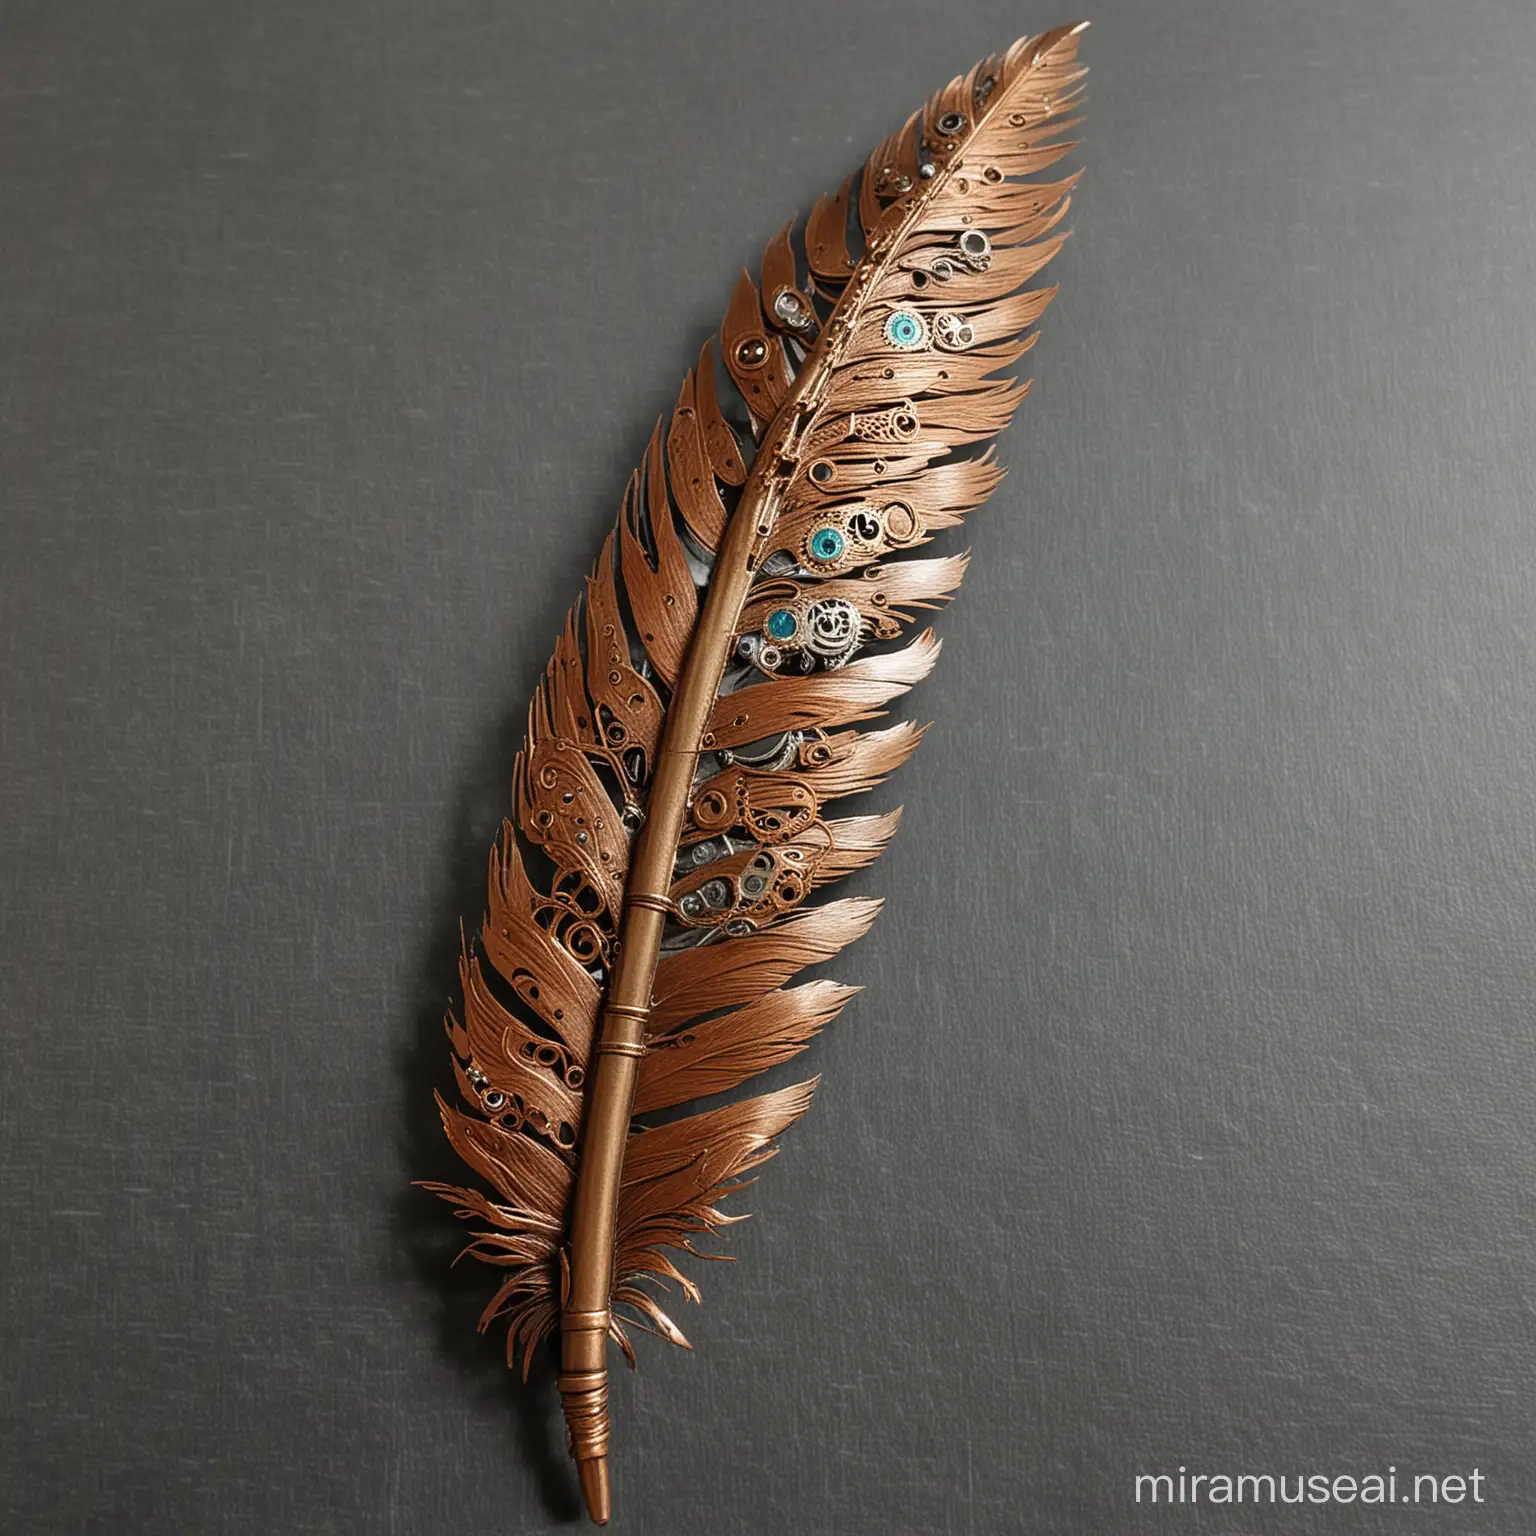 Steampunk Feather Design with Intricate Gears and Clockwork Accents